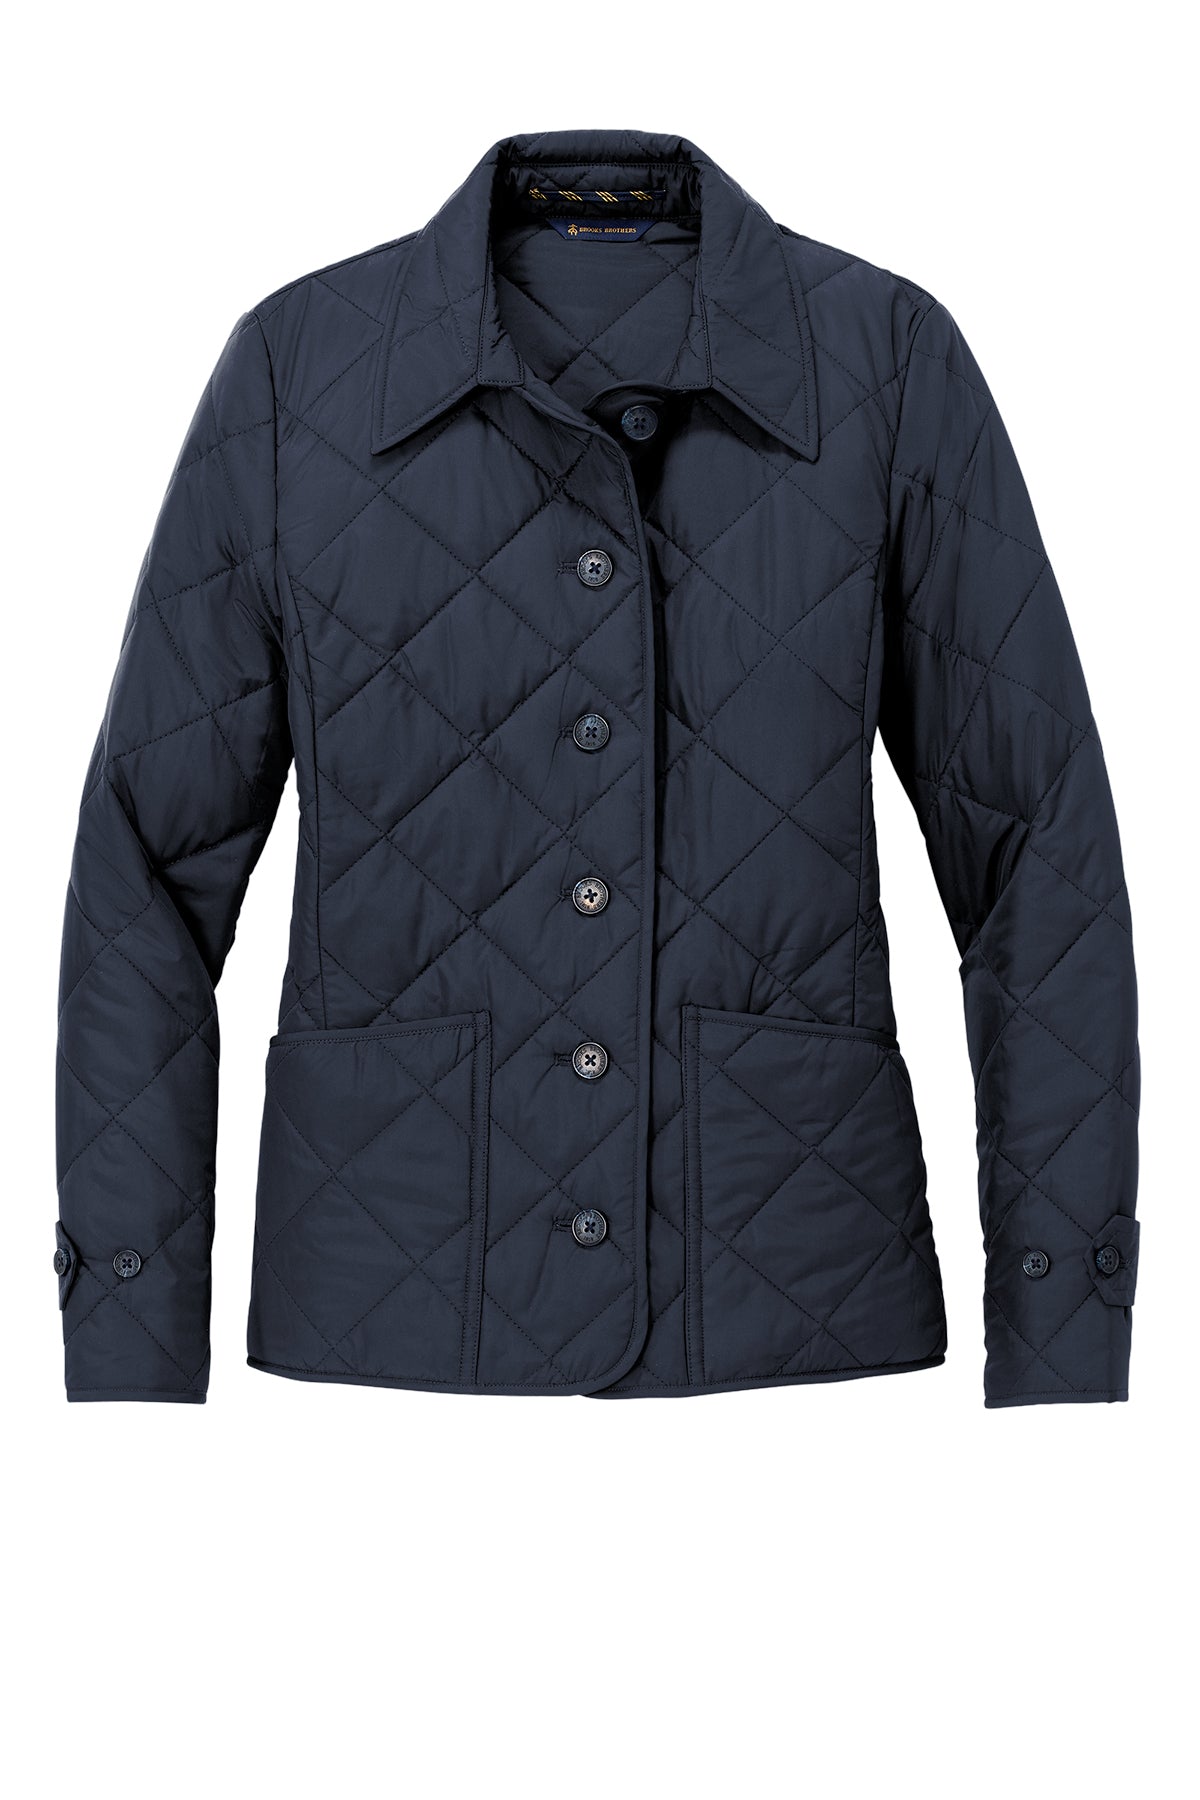 Brooks Brothers® Women’s Quilted Jacket